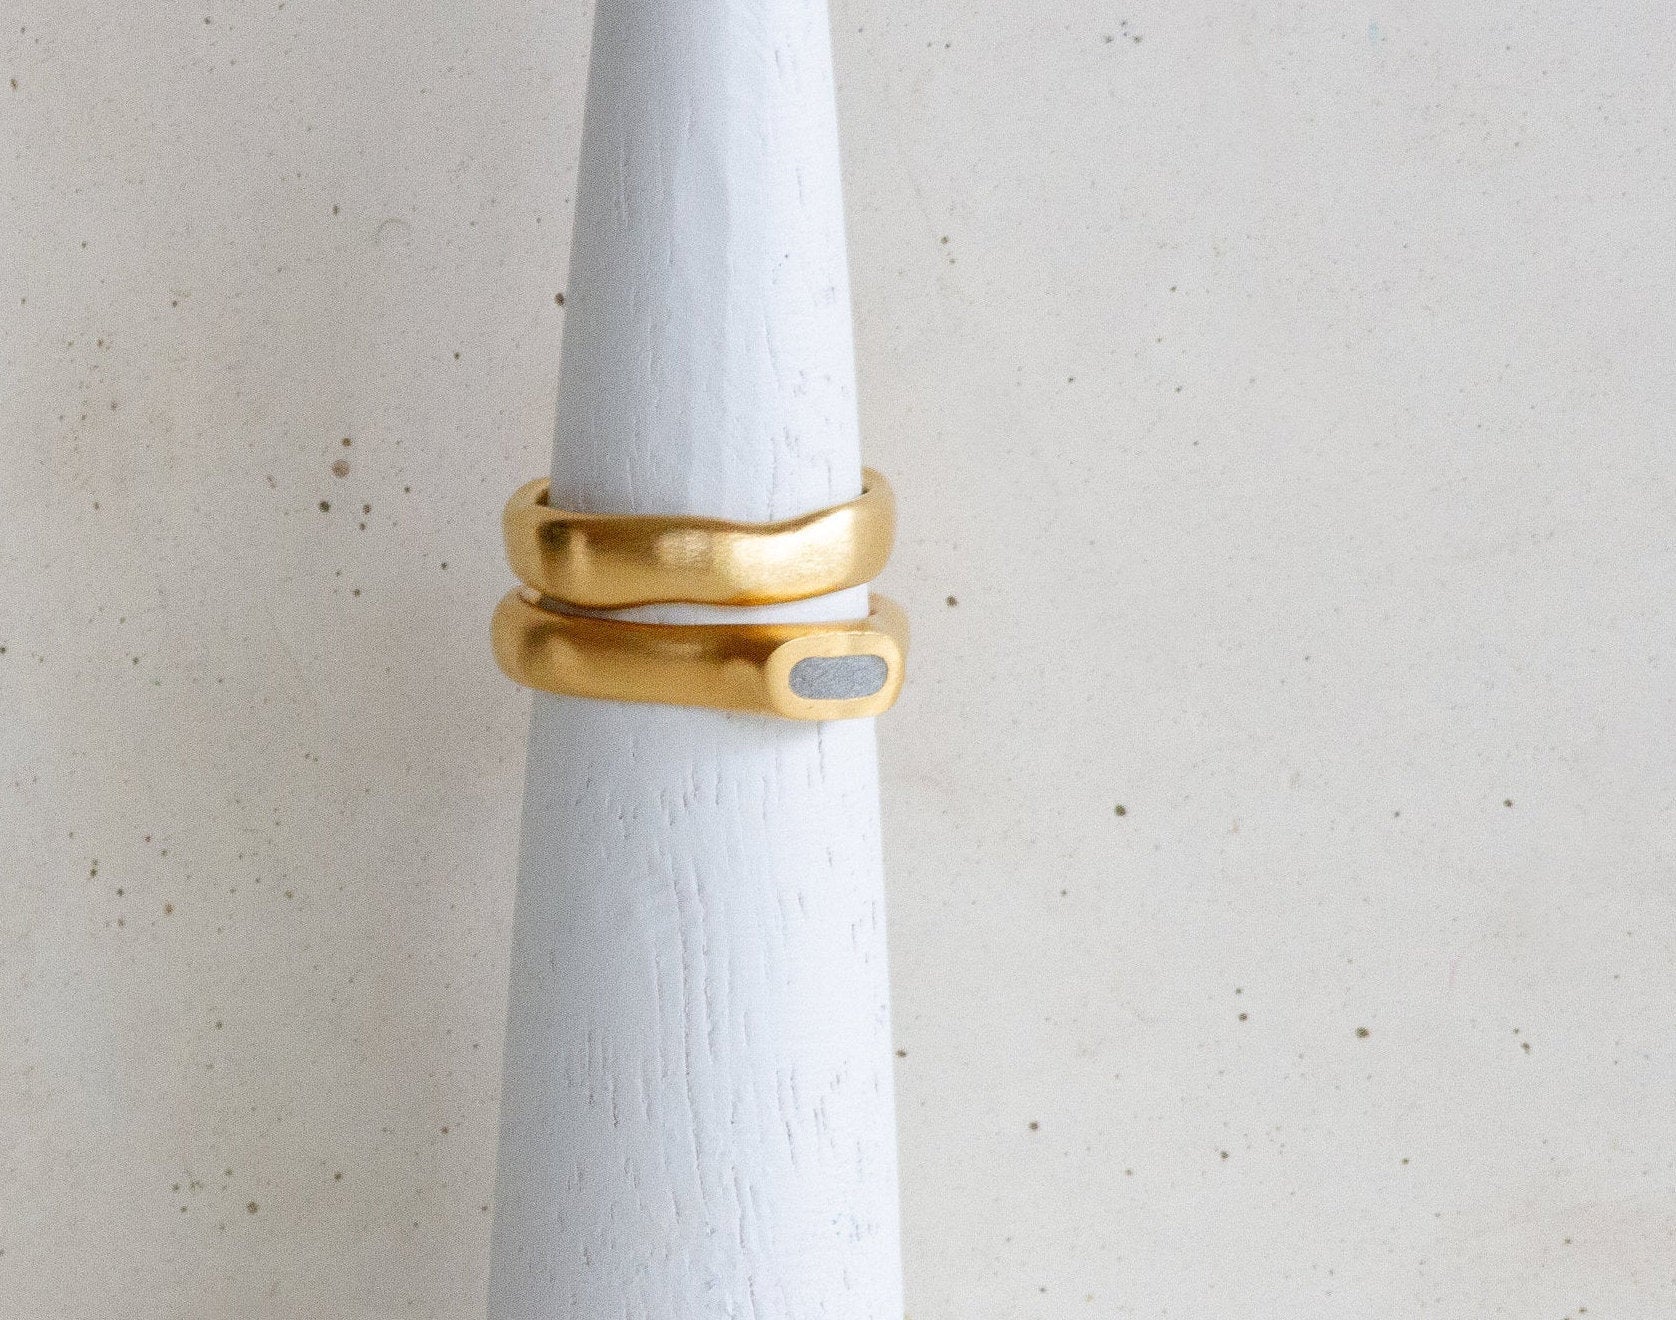 Gold and Concrete Oval Ring - hs